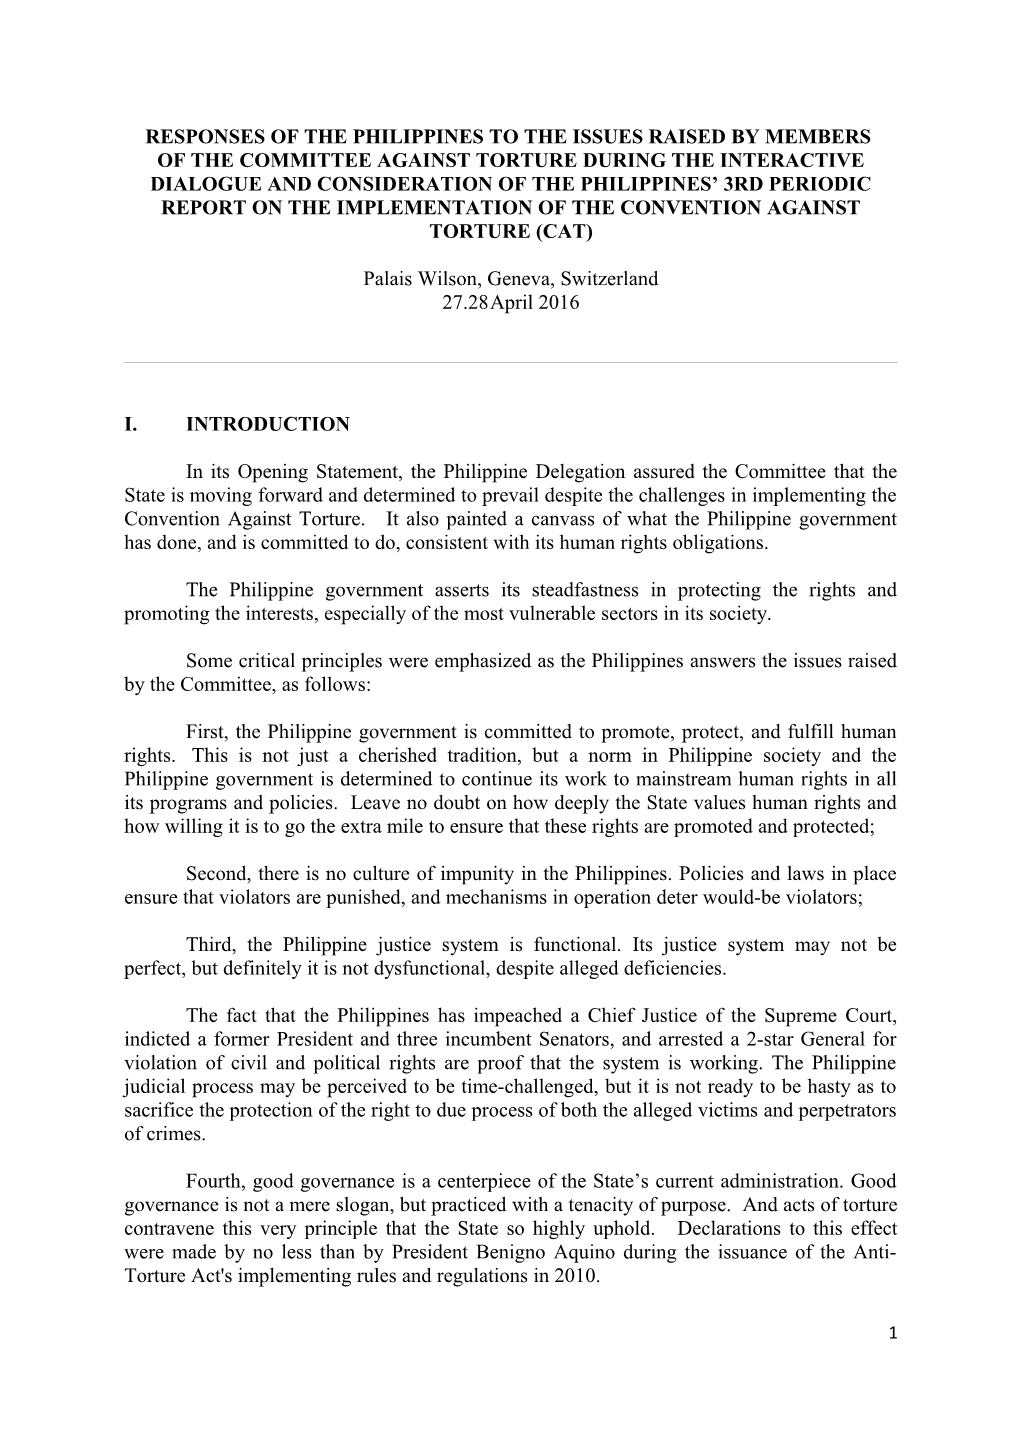 Responses of the Philippines to the Issues Raised by Members